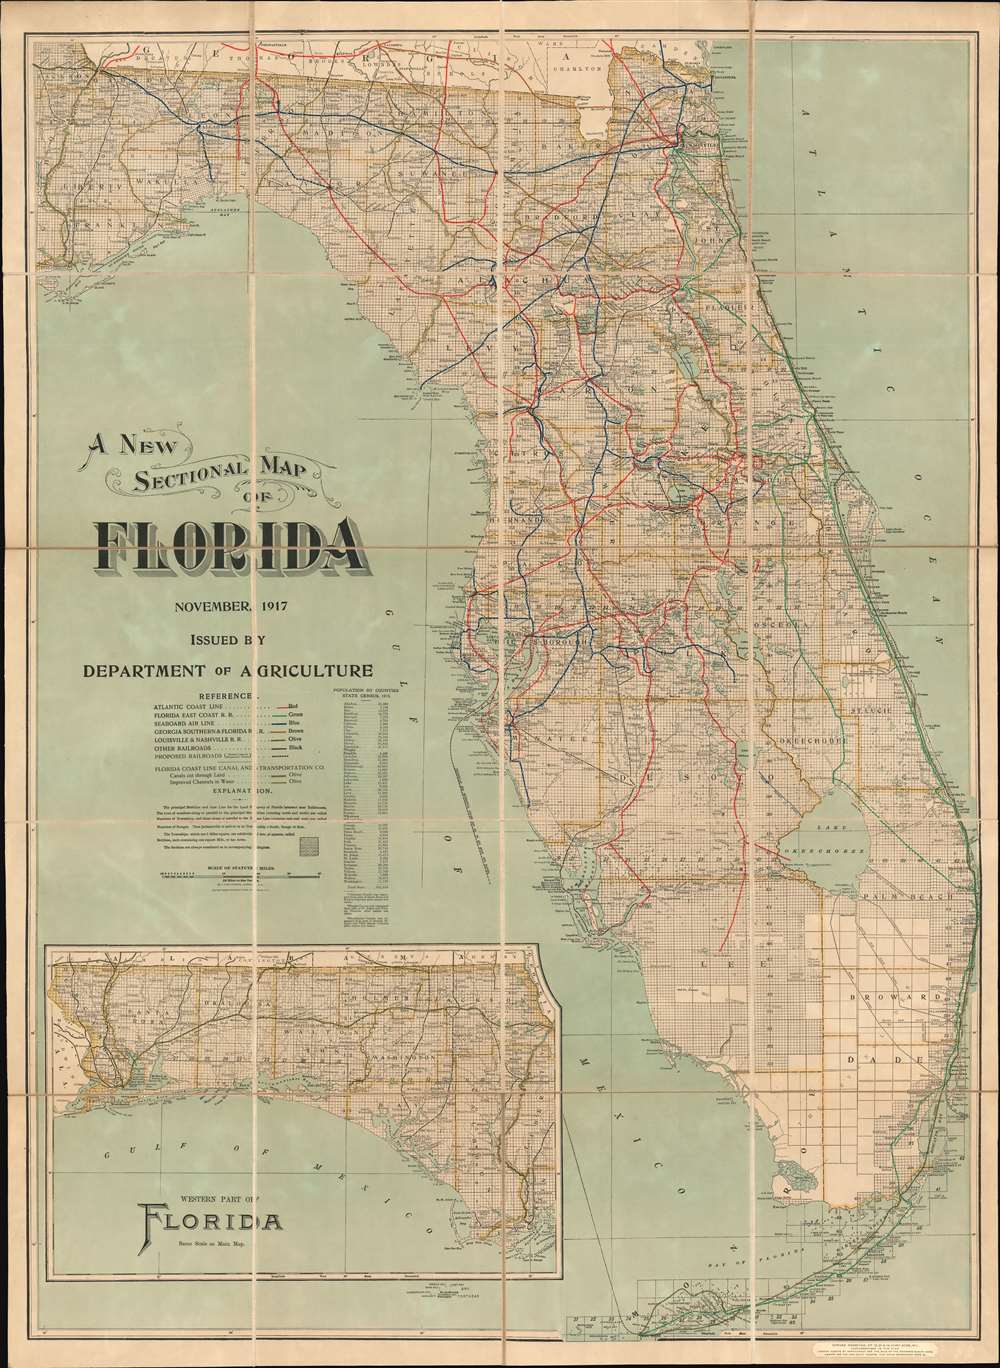 A New Sectional Map of Florida. - Main View